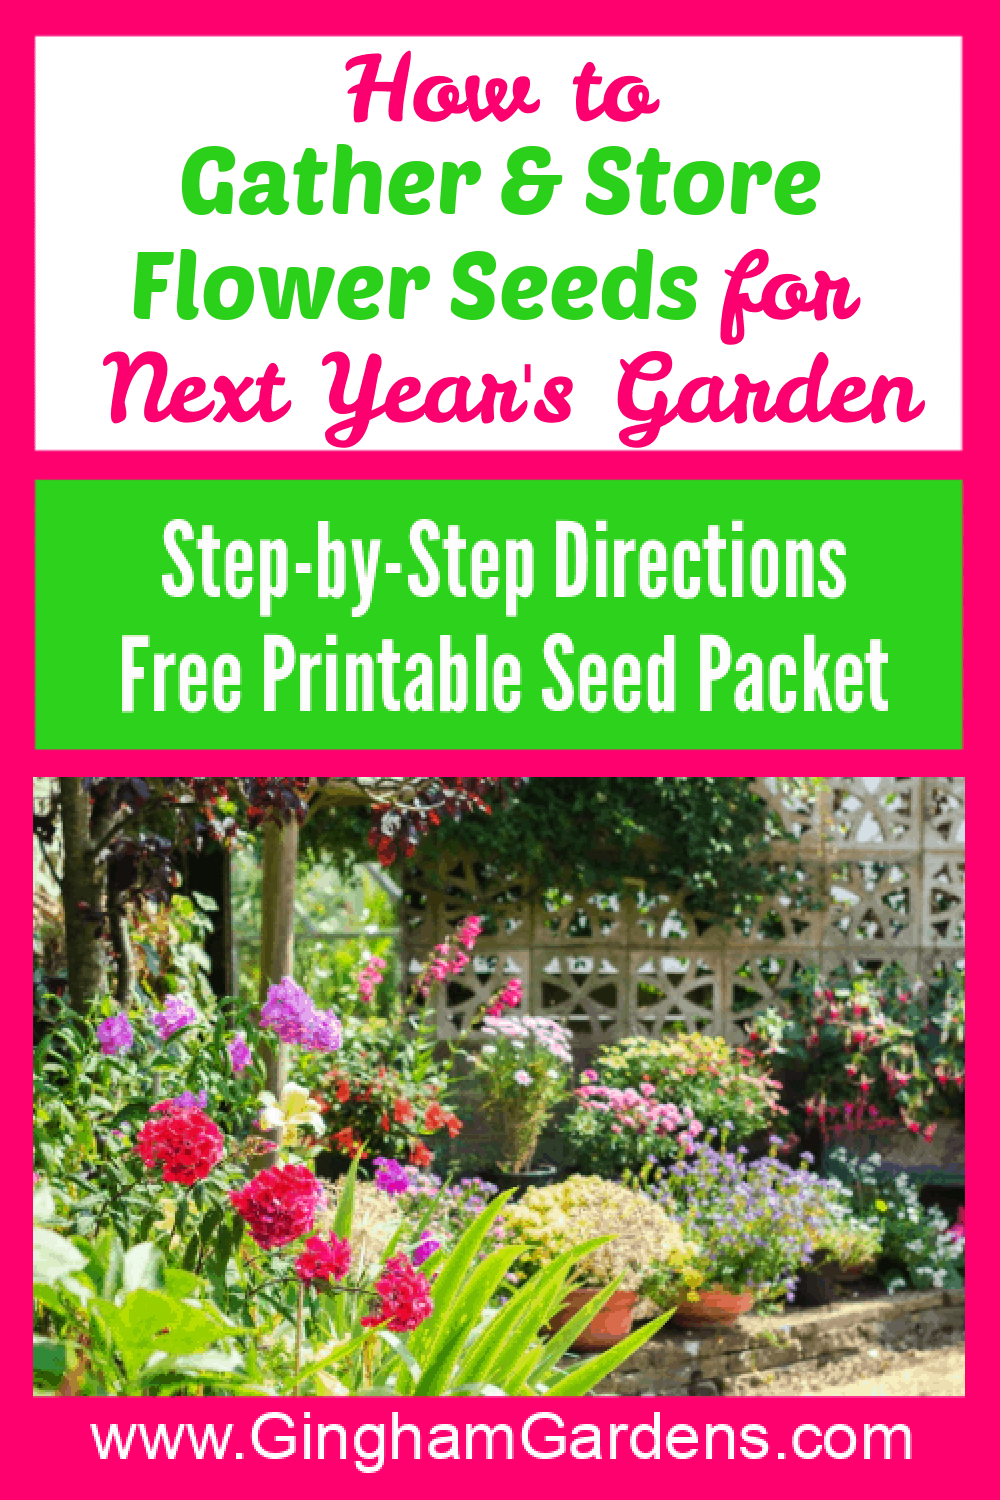 Image of Flower Garden with Text Overlay - How to Gather & Store Flower Seeds for Next Year's Garden